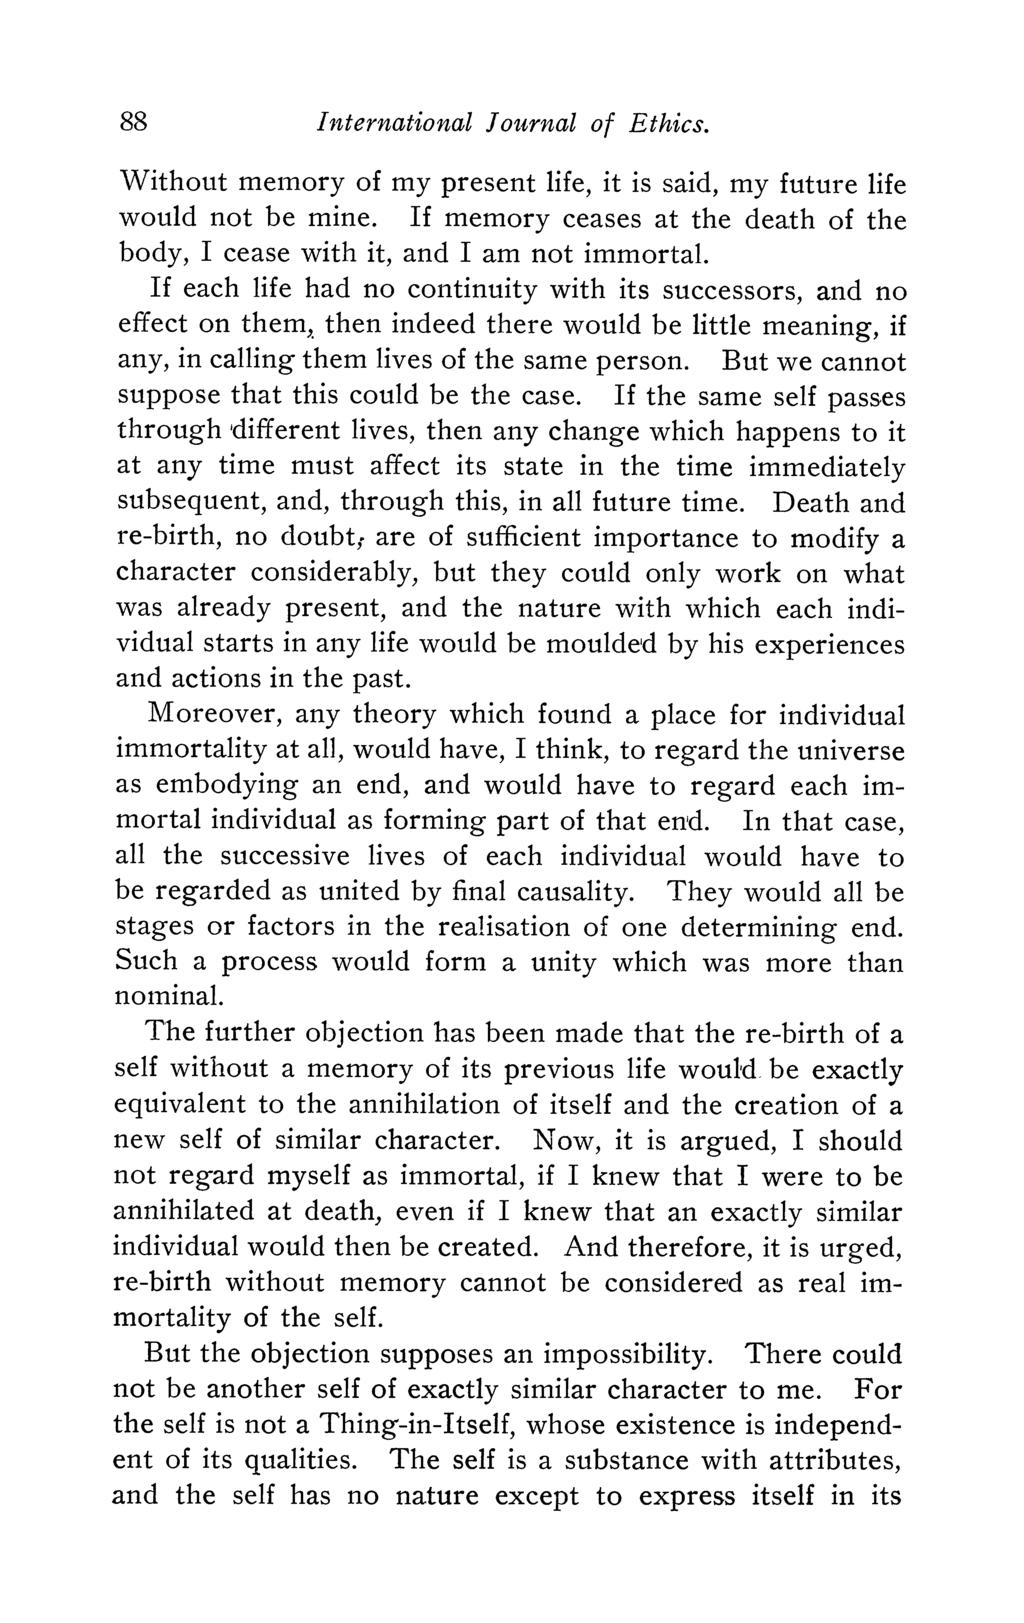 88 International Journal of Ethics. Without memory of my present life, it is said, my future life would not be mine. If memory ceases at the death of the body, I cease with it, and I am not immortal.